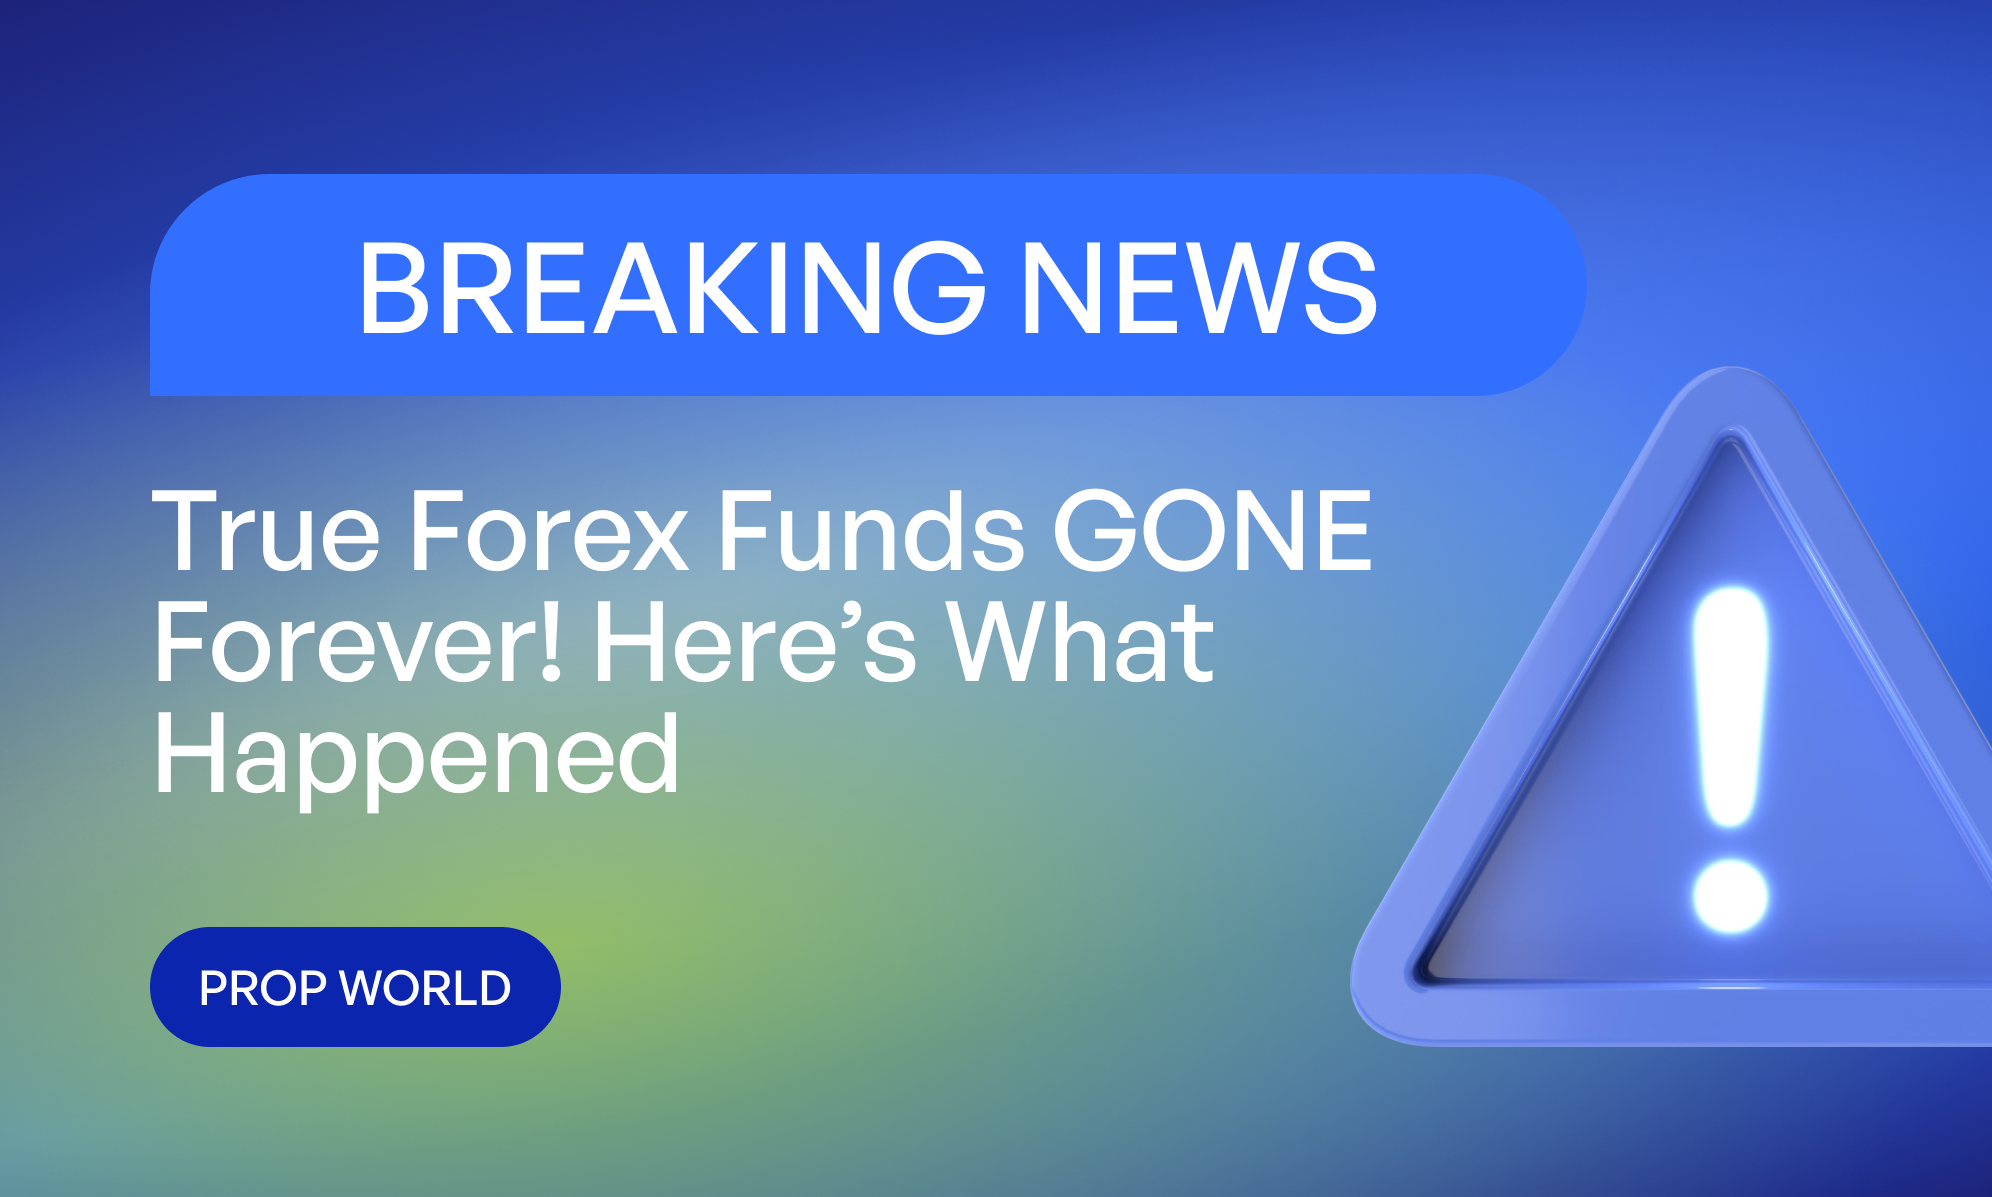 True Forex Funds GONE Forever! Here’s What Happened